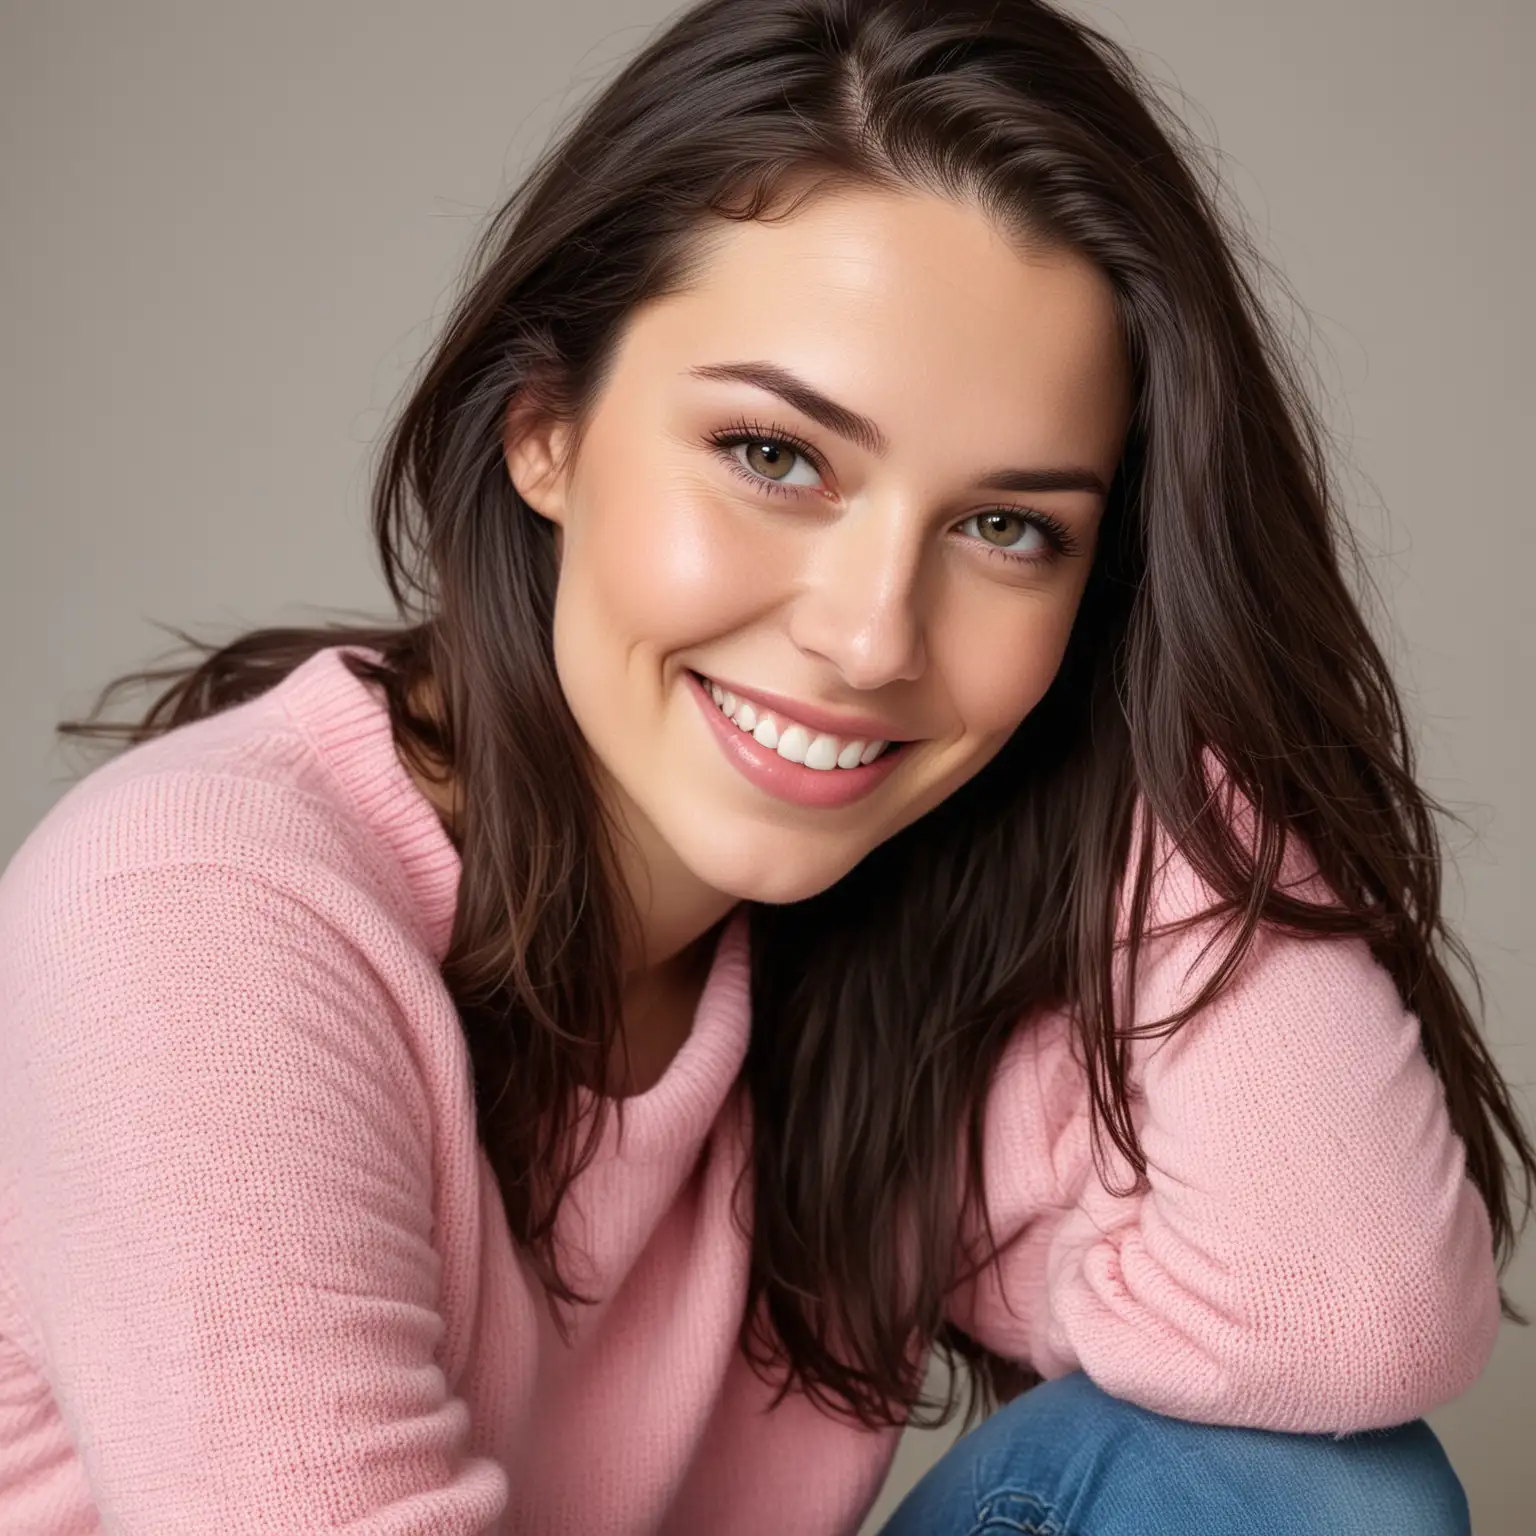 Smiling Young Woman with Long Dark Hair and Pink Sweater on White Background